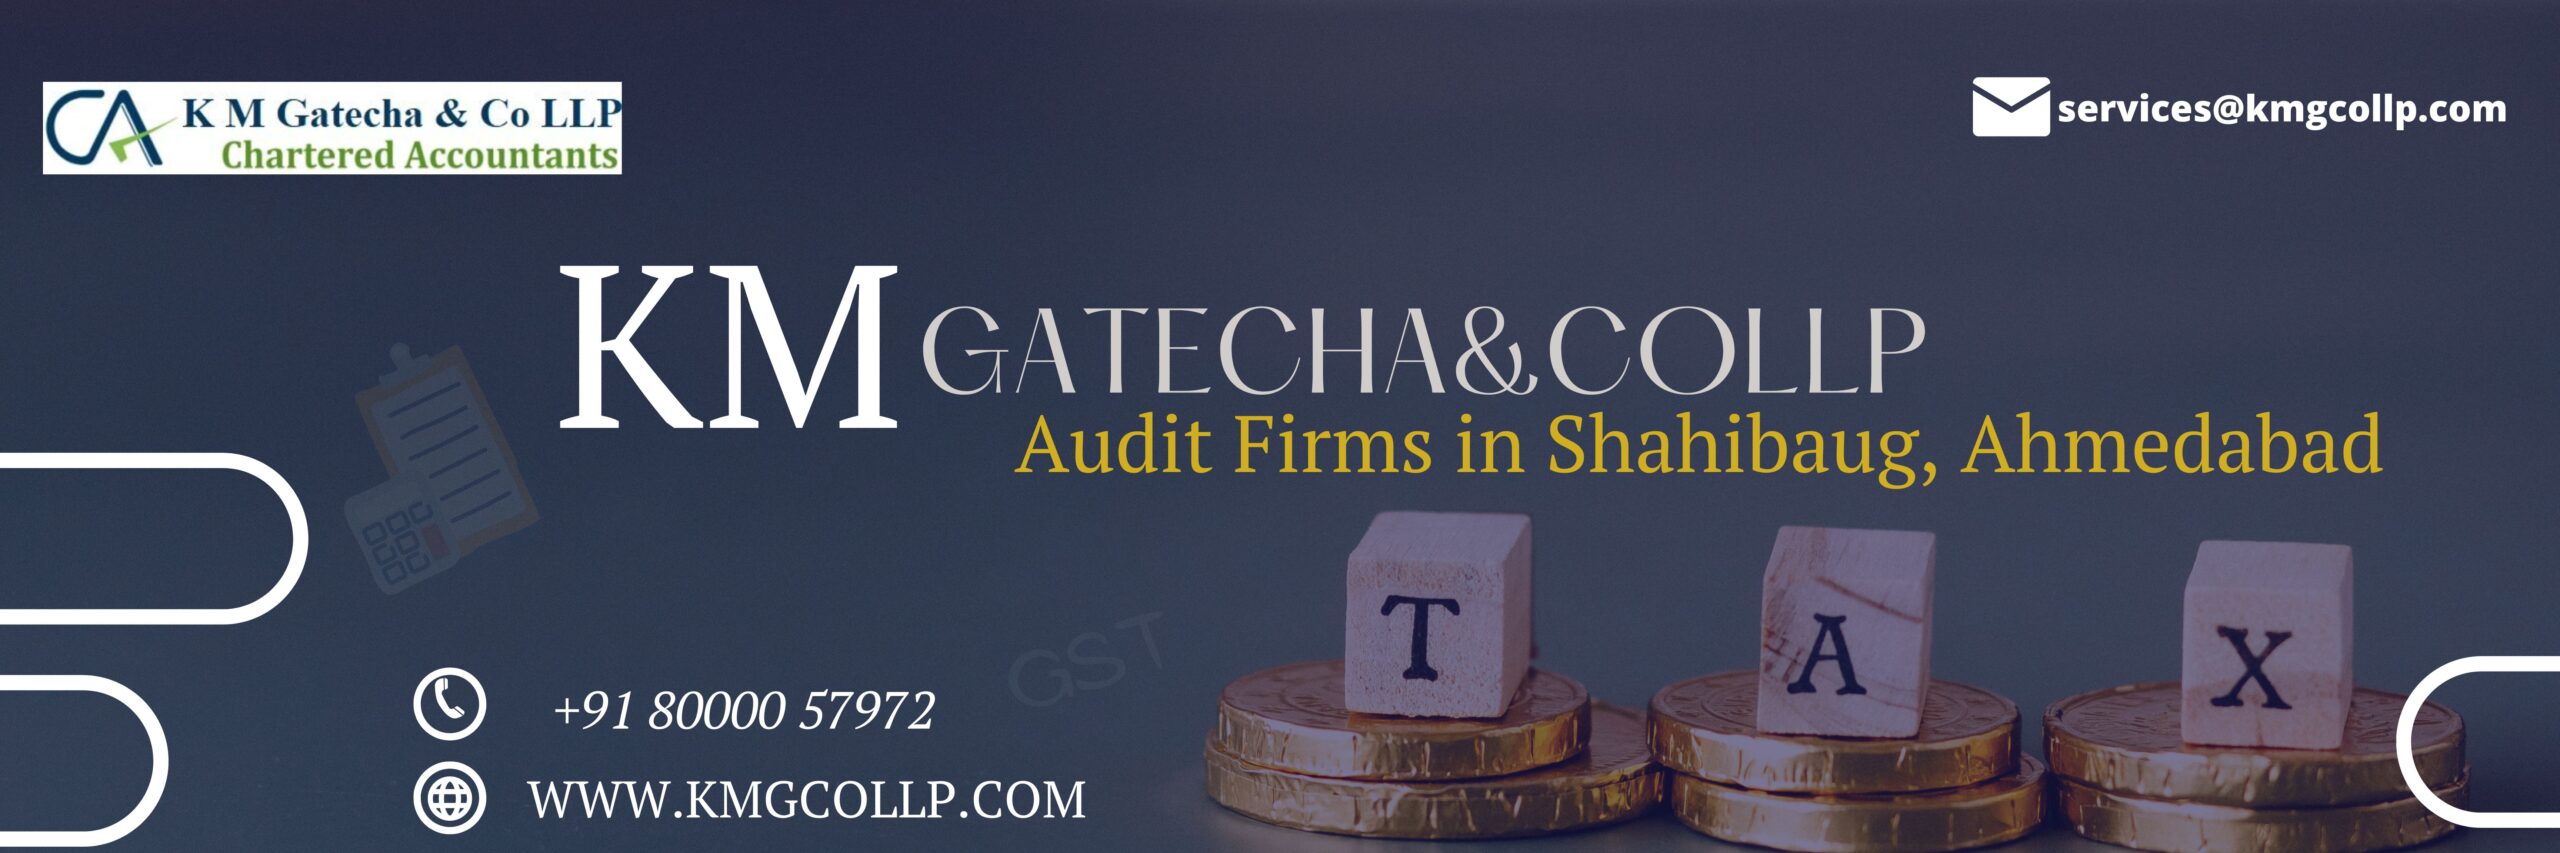 Audit Firms in Shahibaug, Ahmedabad